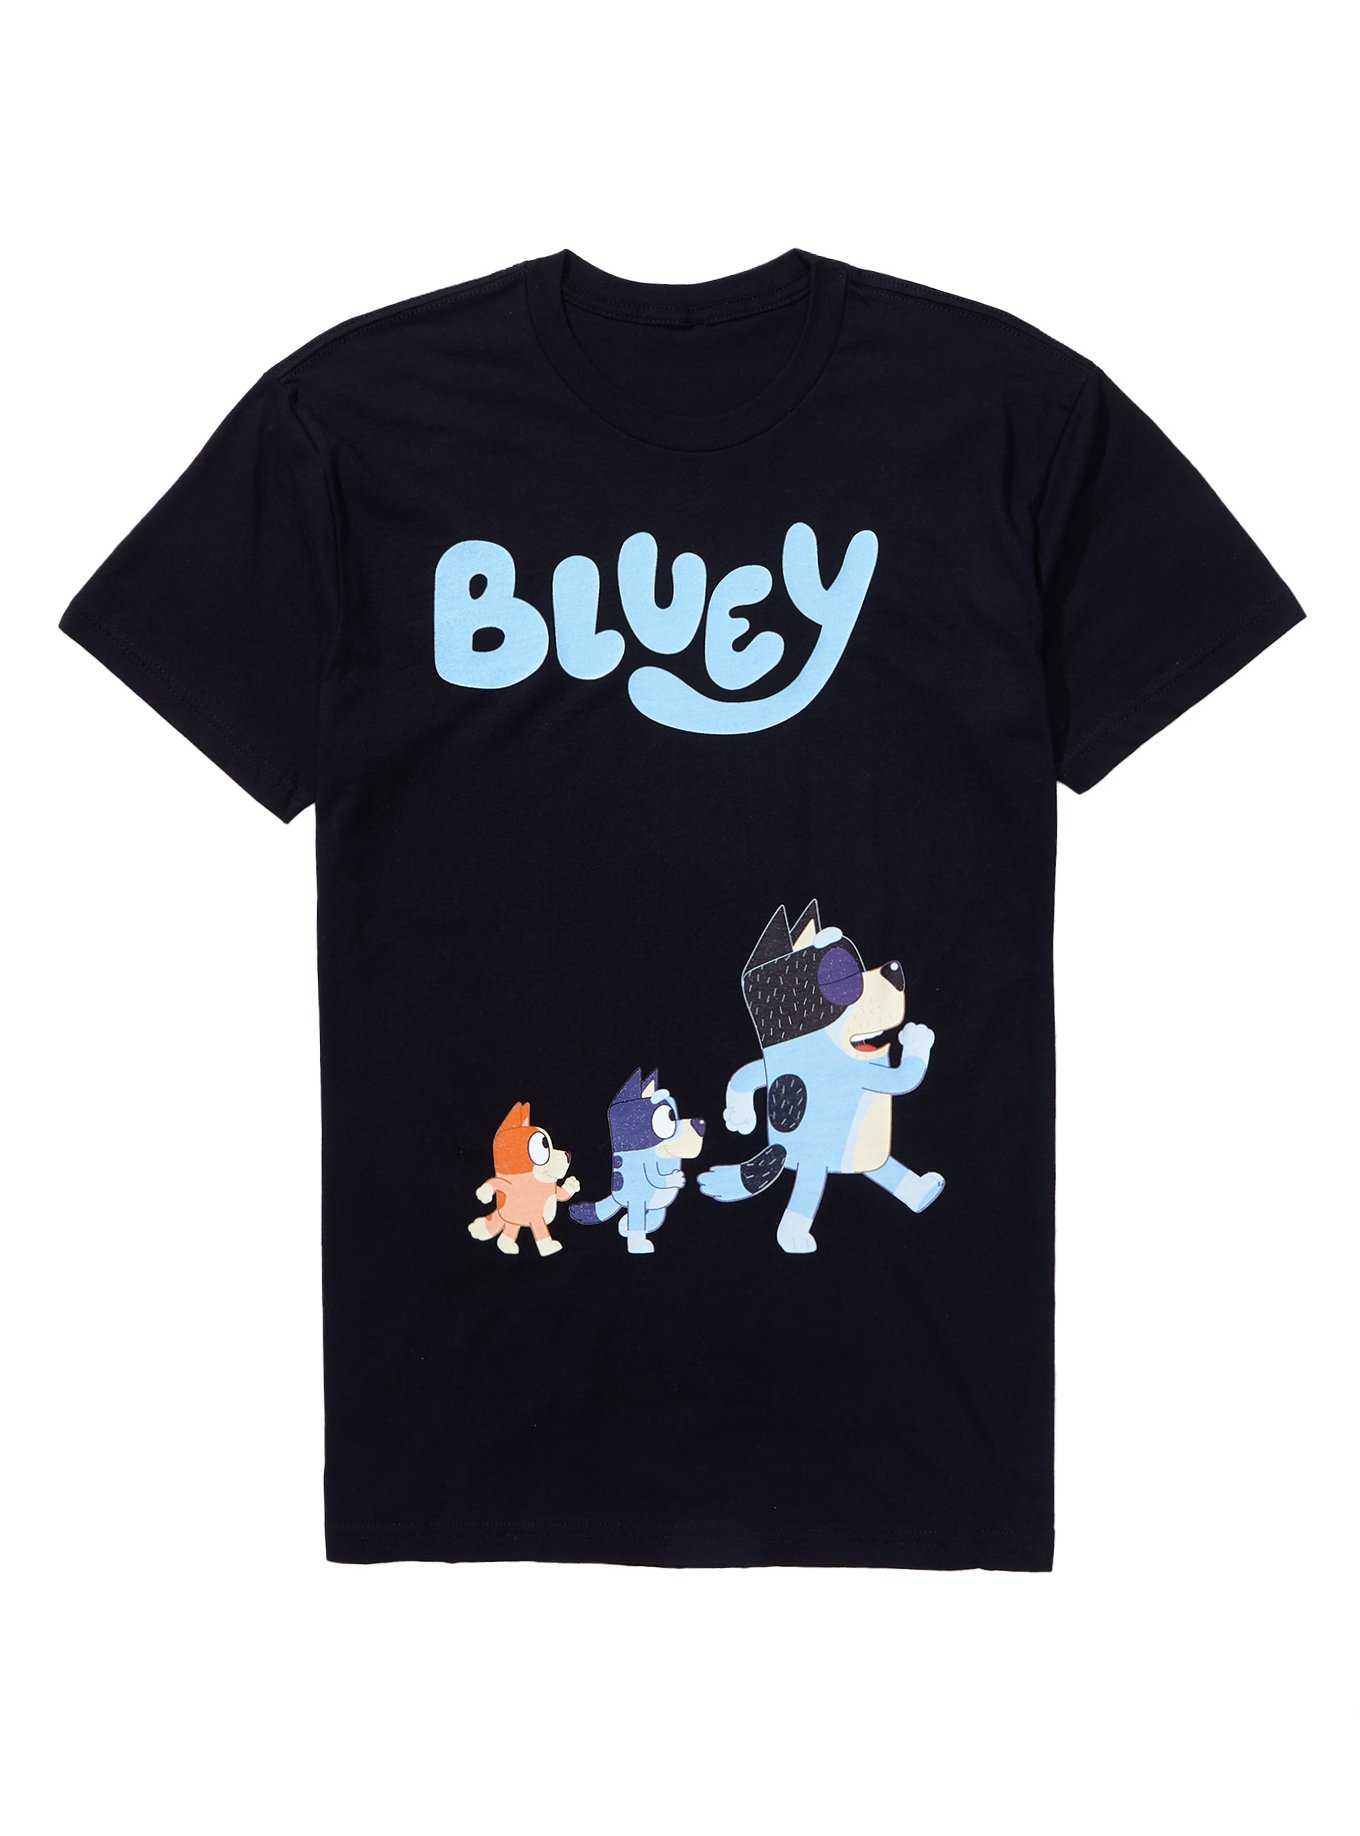 Bluey Clothes for Adults